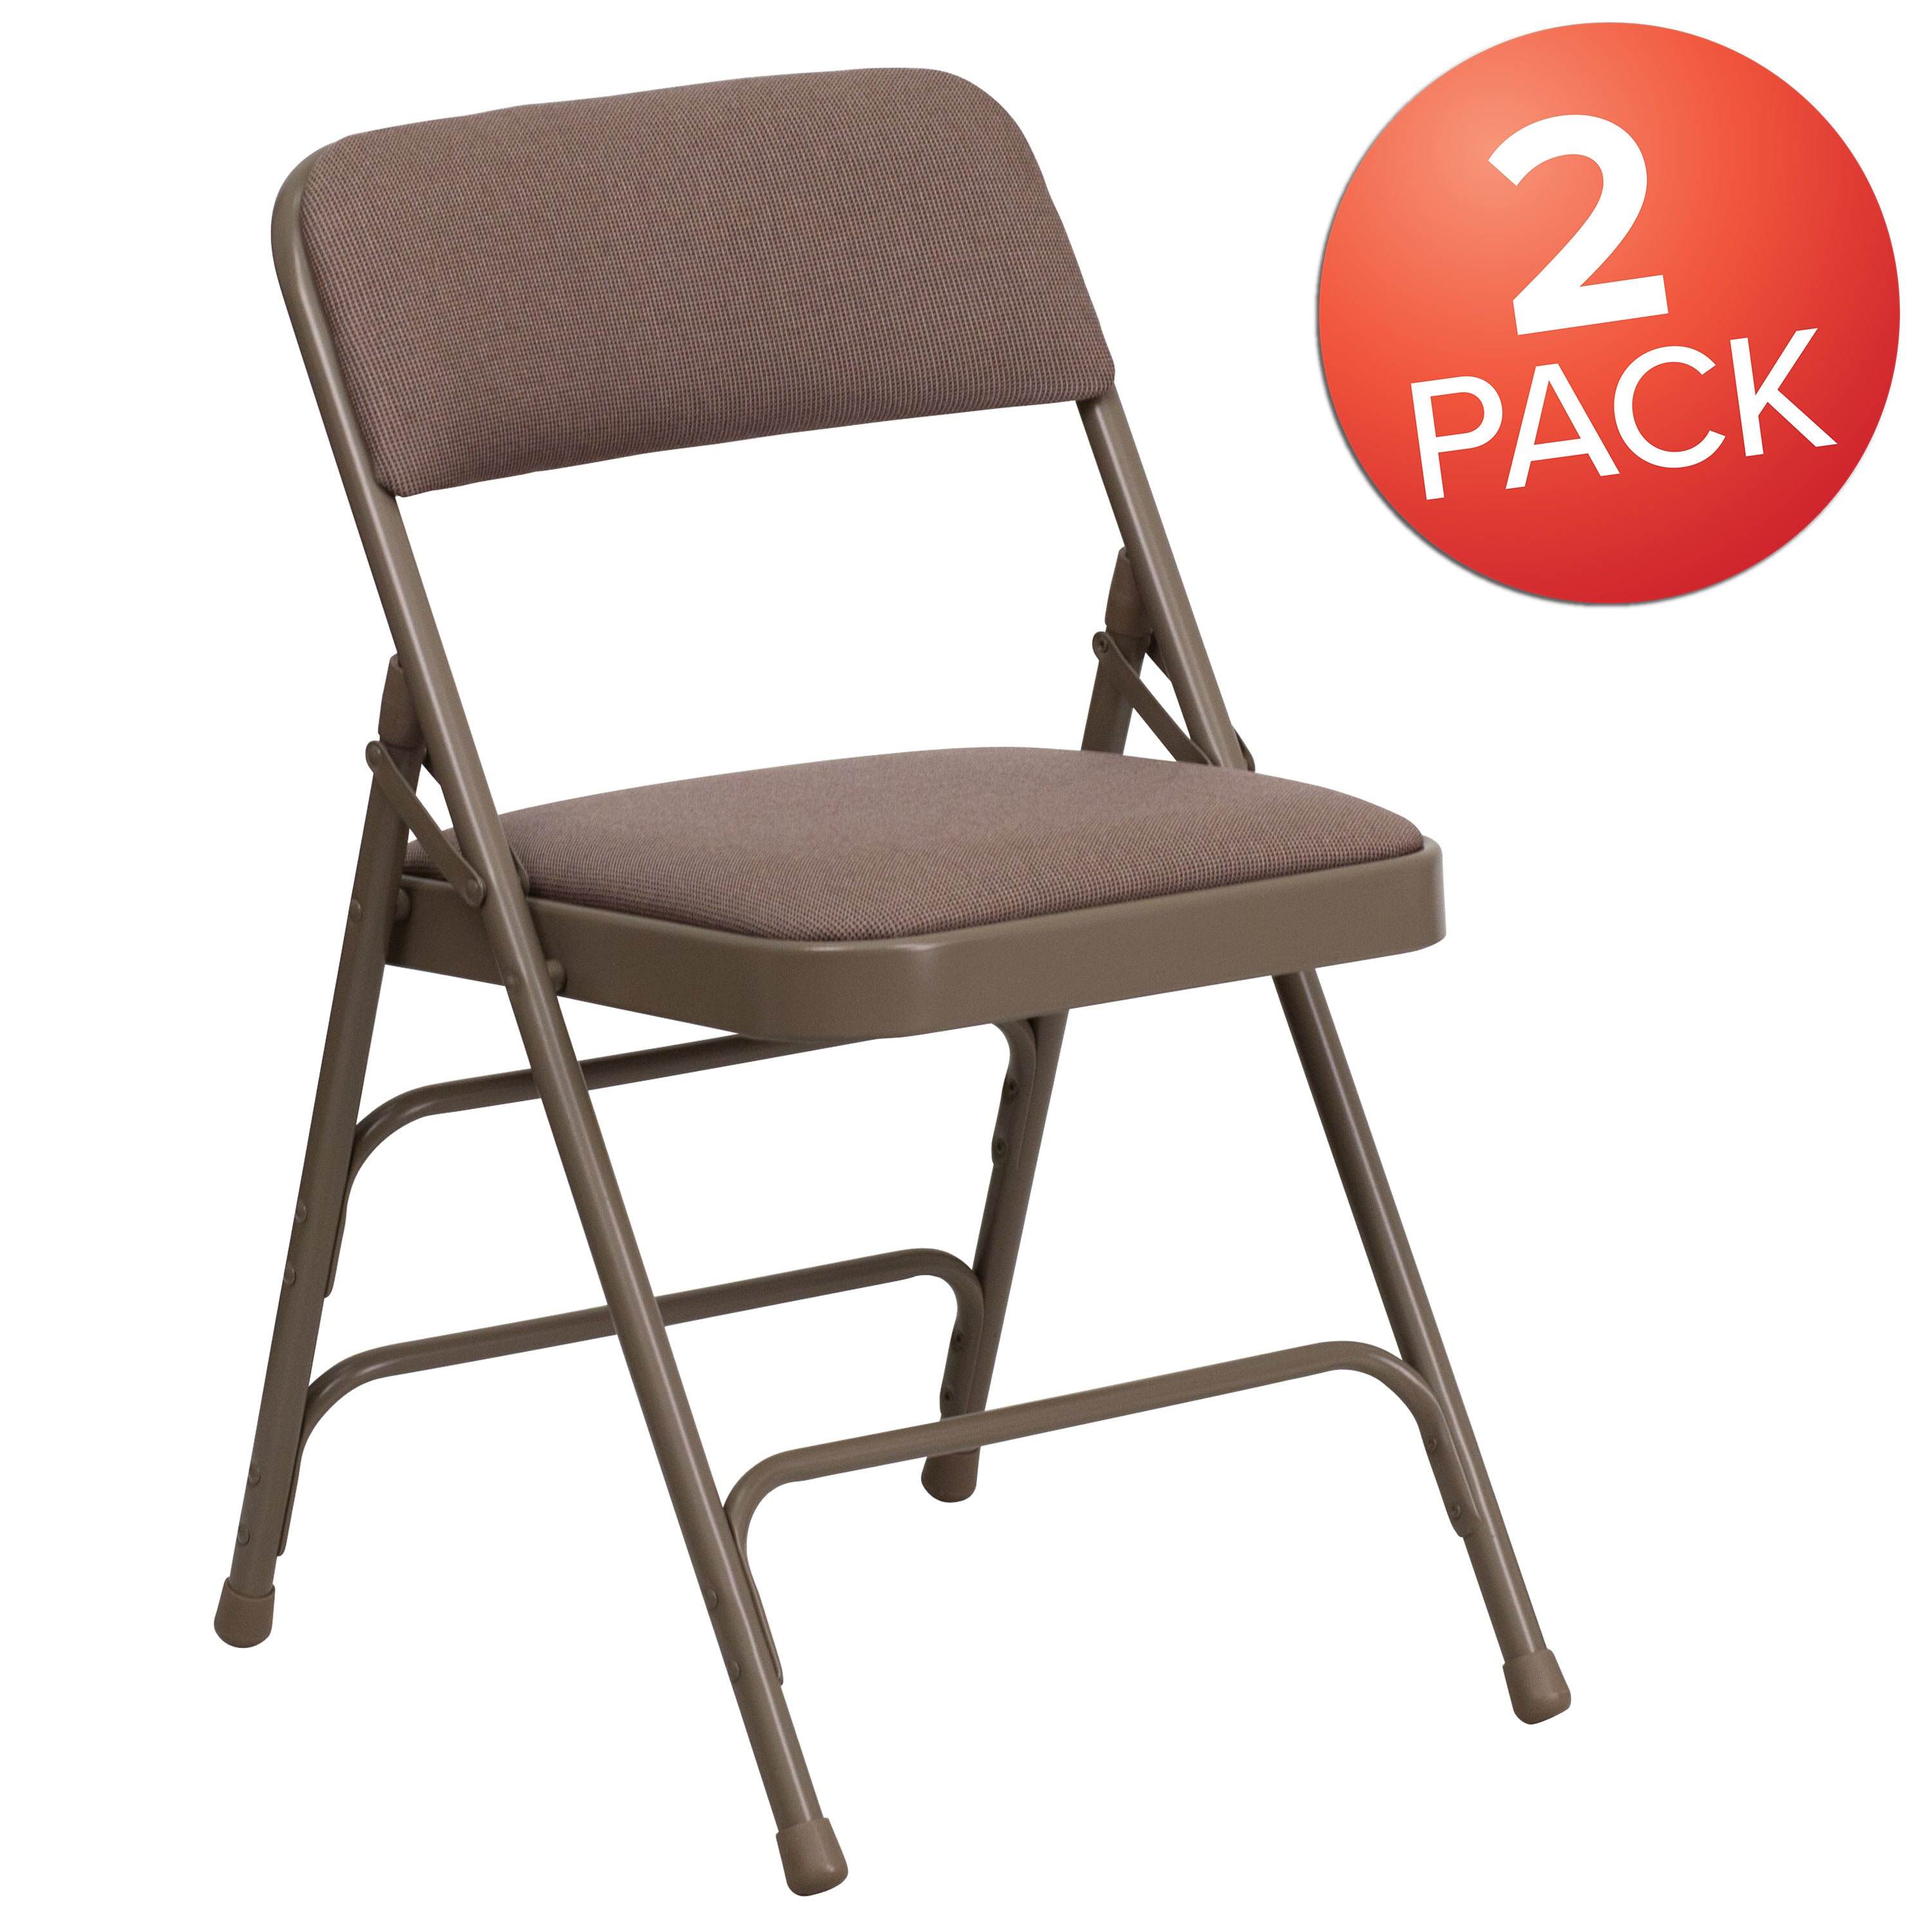 HERCULES Series Metal Folding Chairs with Padded Seats | Set of 2 Black Metal Folding Chairs-Metal Folding Chair-Flash Furniture-Wall2Wall Furnishings